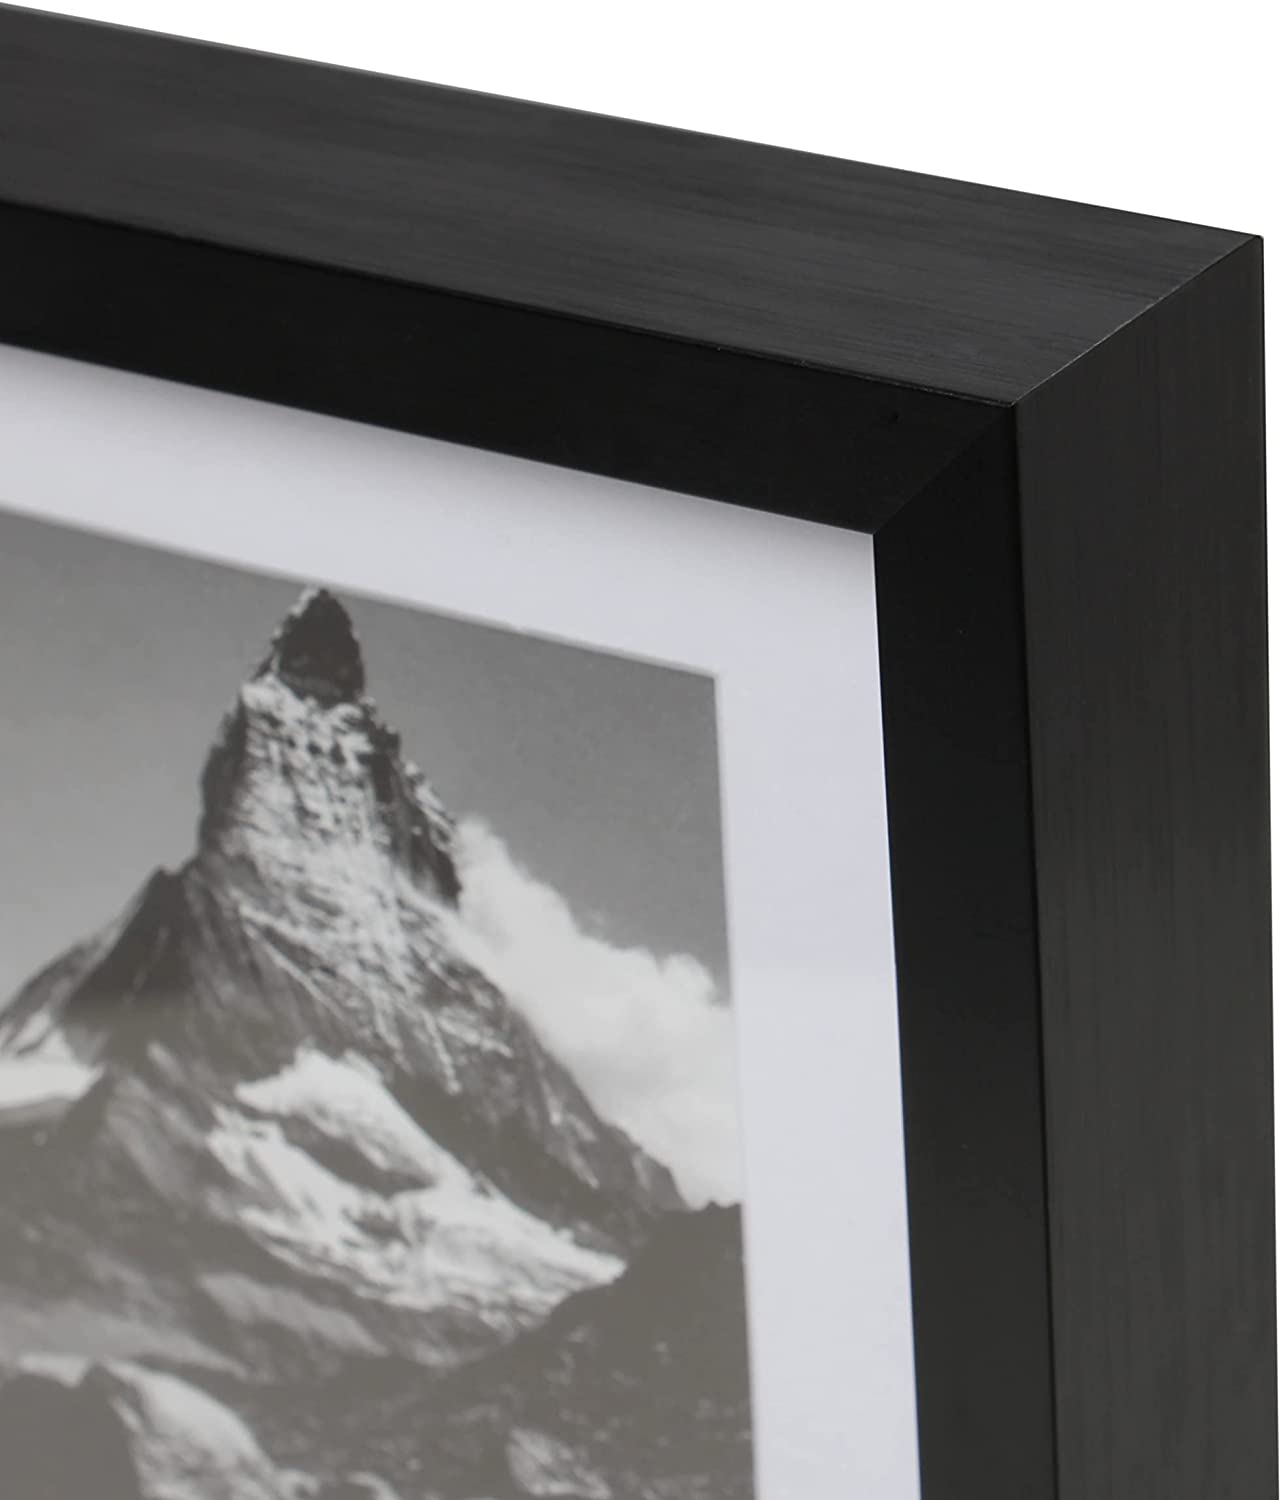 11" x 14" Deluxe Black Aluminum Contemporary Picture Frame, 8" x 10" Matted